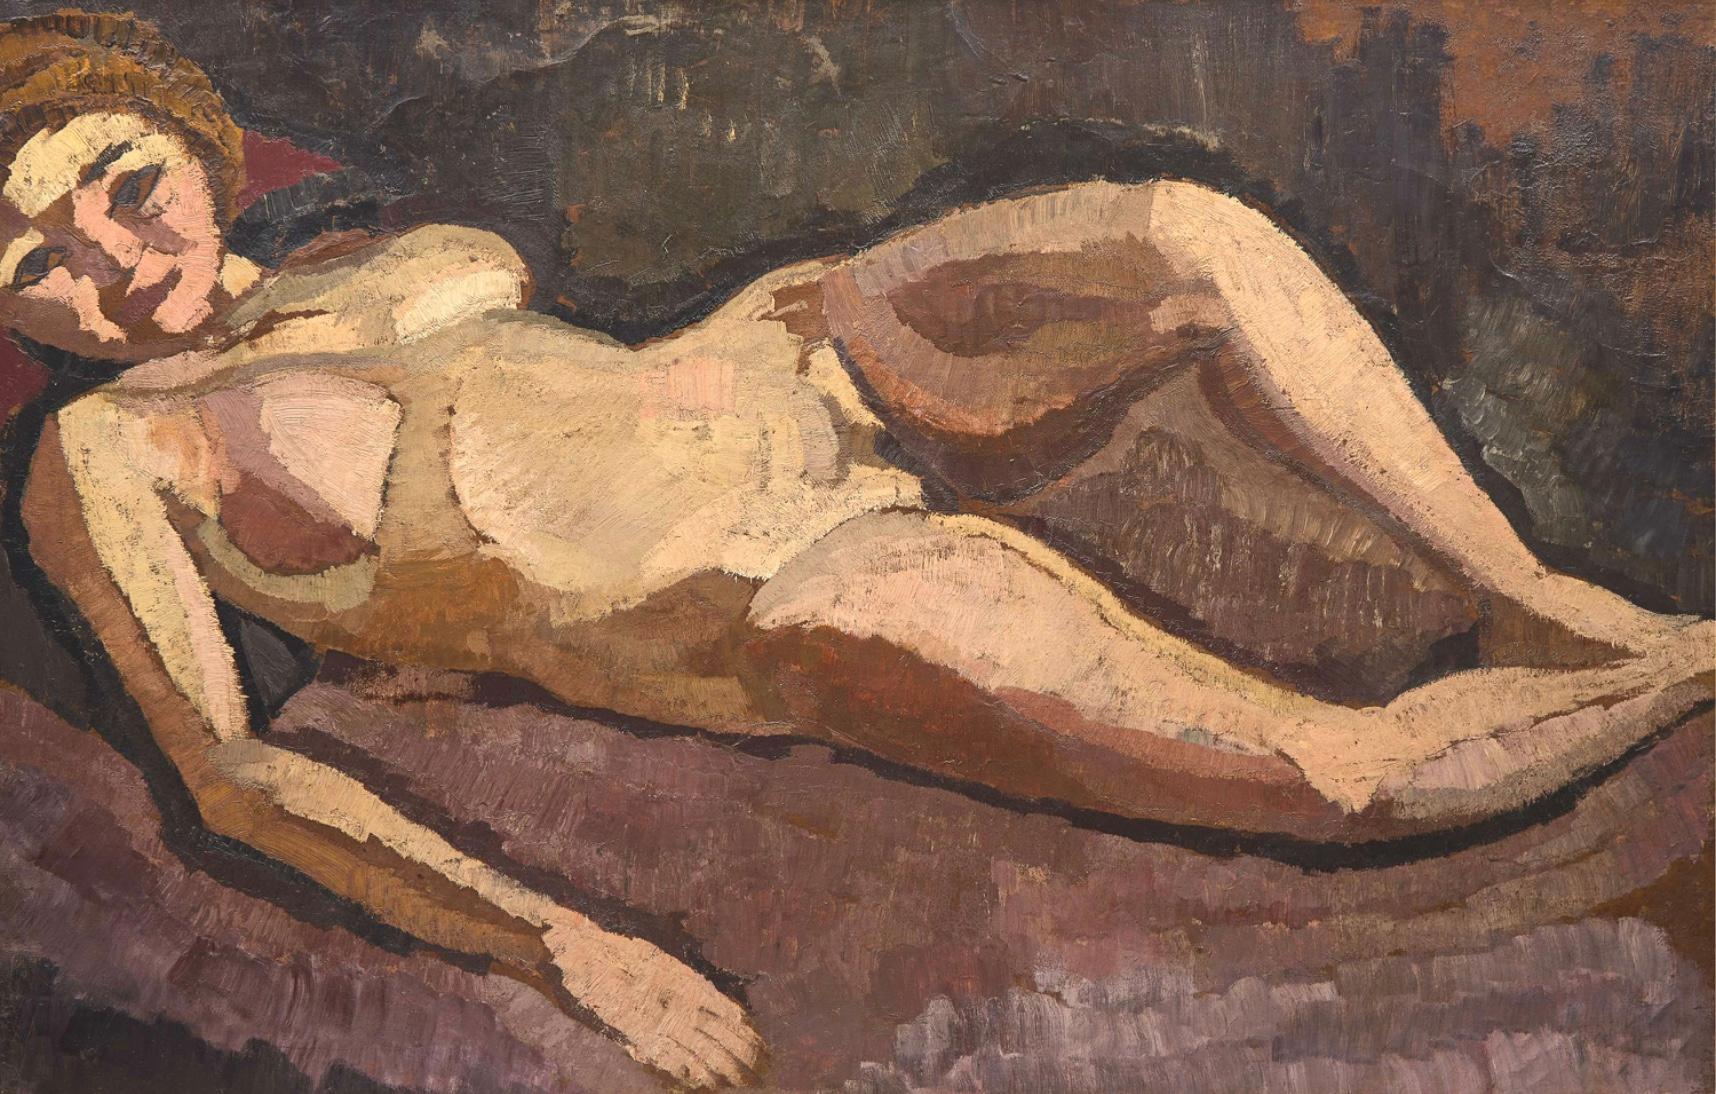 Roger de la Fresnaye (French, 1885-1925) - Femme Nue Couchée

Monumental 90% life size nude model painting executed during the zenith and birth of cubism and expressionism. 

Oil on canvas
Canvas: 26.75 x 41.25 inches. (67.9 x 104.8cm)
Framed: 35.5